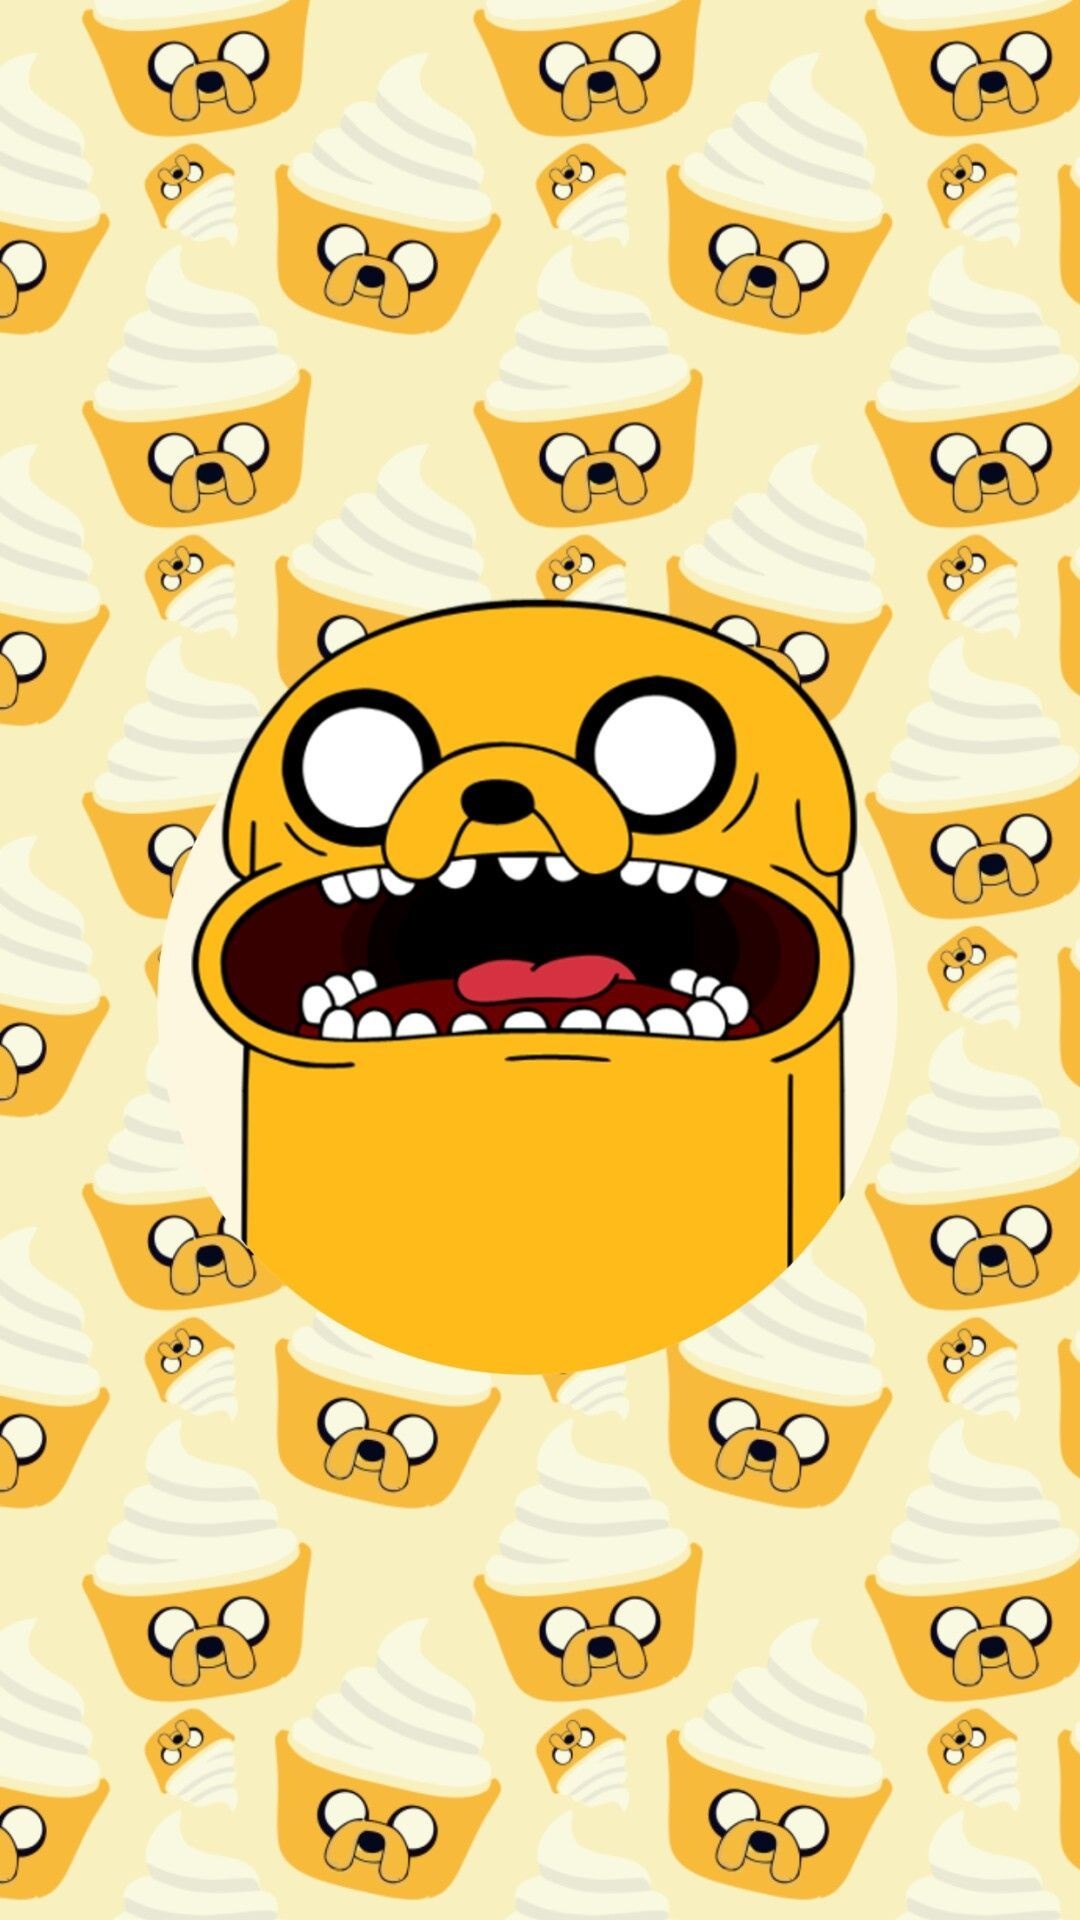 Adventure Time wallpaper, 140th episode, Adventure Time series, Finn and Jake, 1080x1920 Full HD Handy